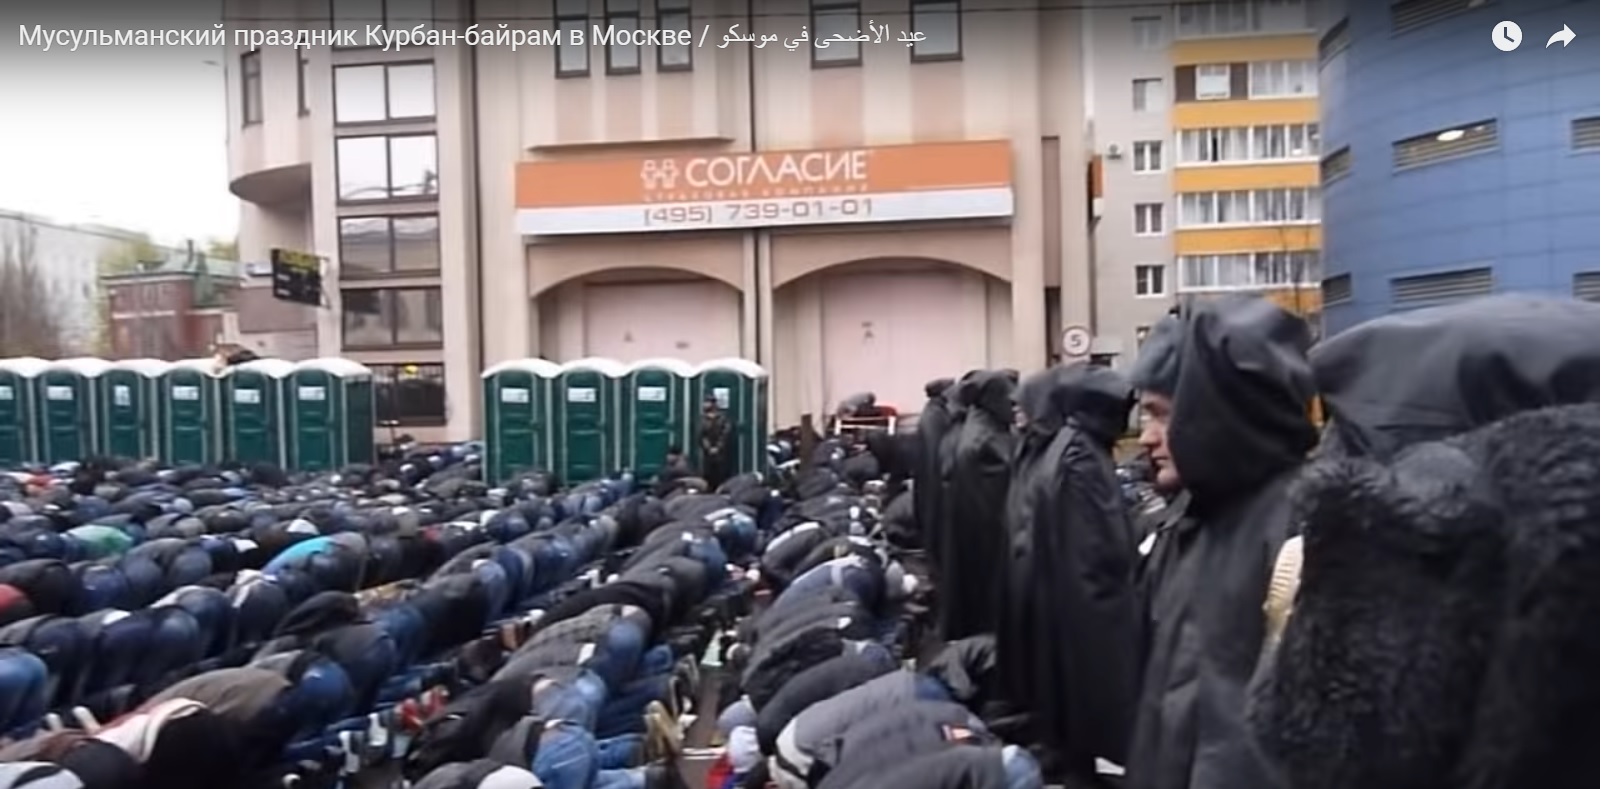 A collective prayer during the Kurban Bayramı Muslim festival in Moscow. Due to the dire shortage of mosques in the city, the faithful pray under the rain in the street while Russian policemen in black rain coats watch over them. (Image: video capture)